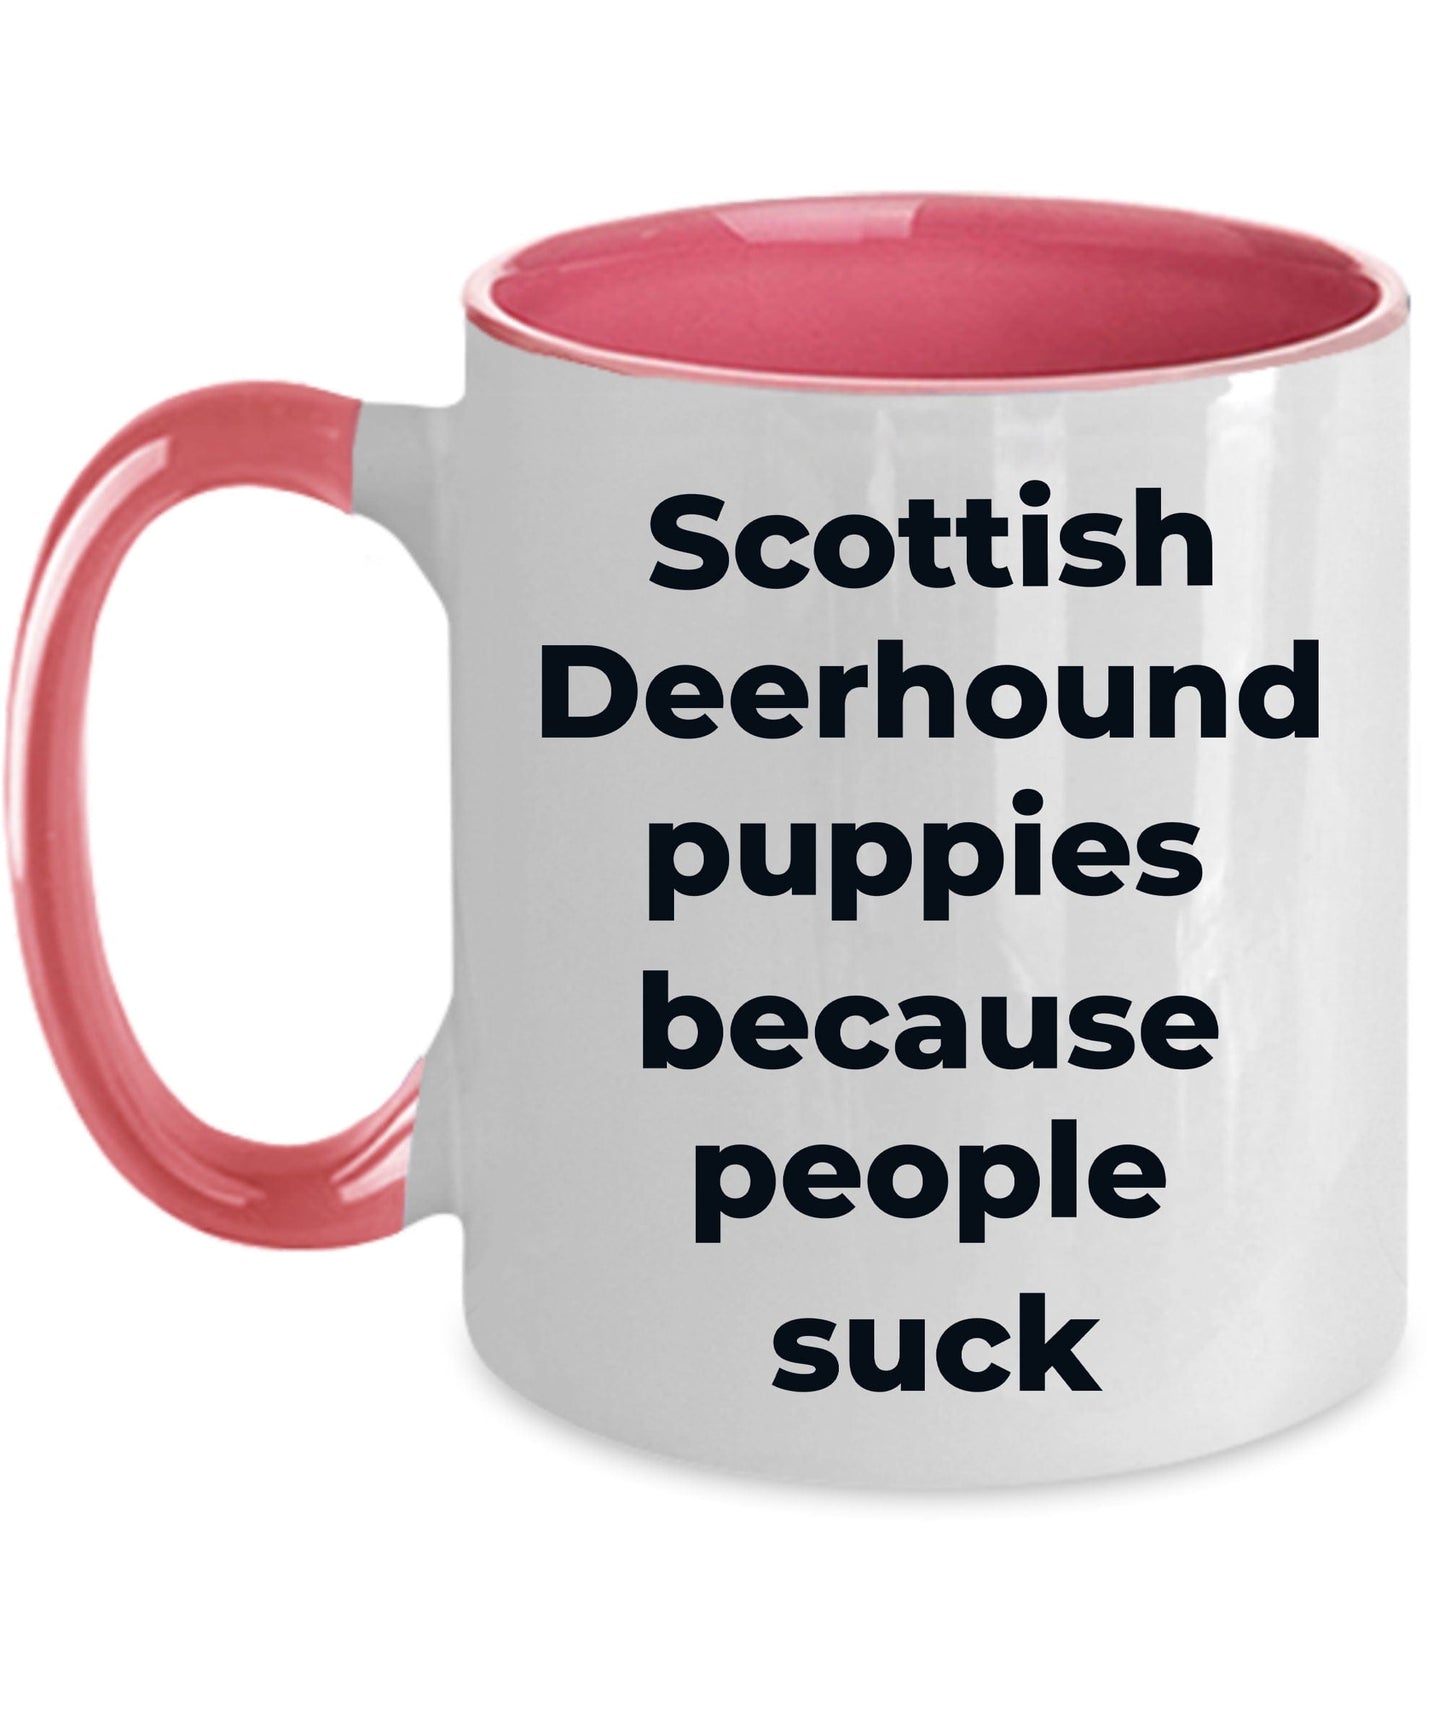 Scottish Deerhound Funny Dog Coffee Mug white and color two tone -puppies because people suck